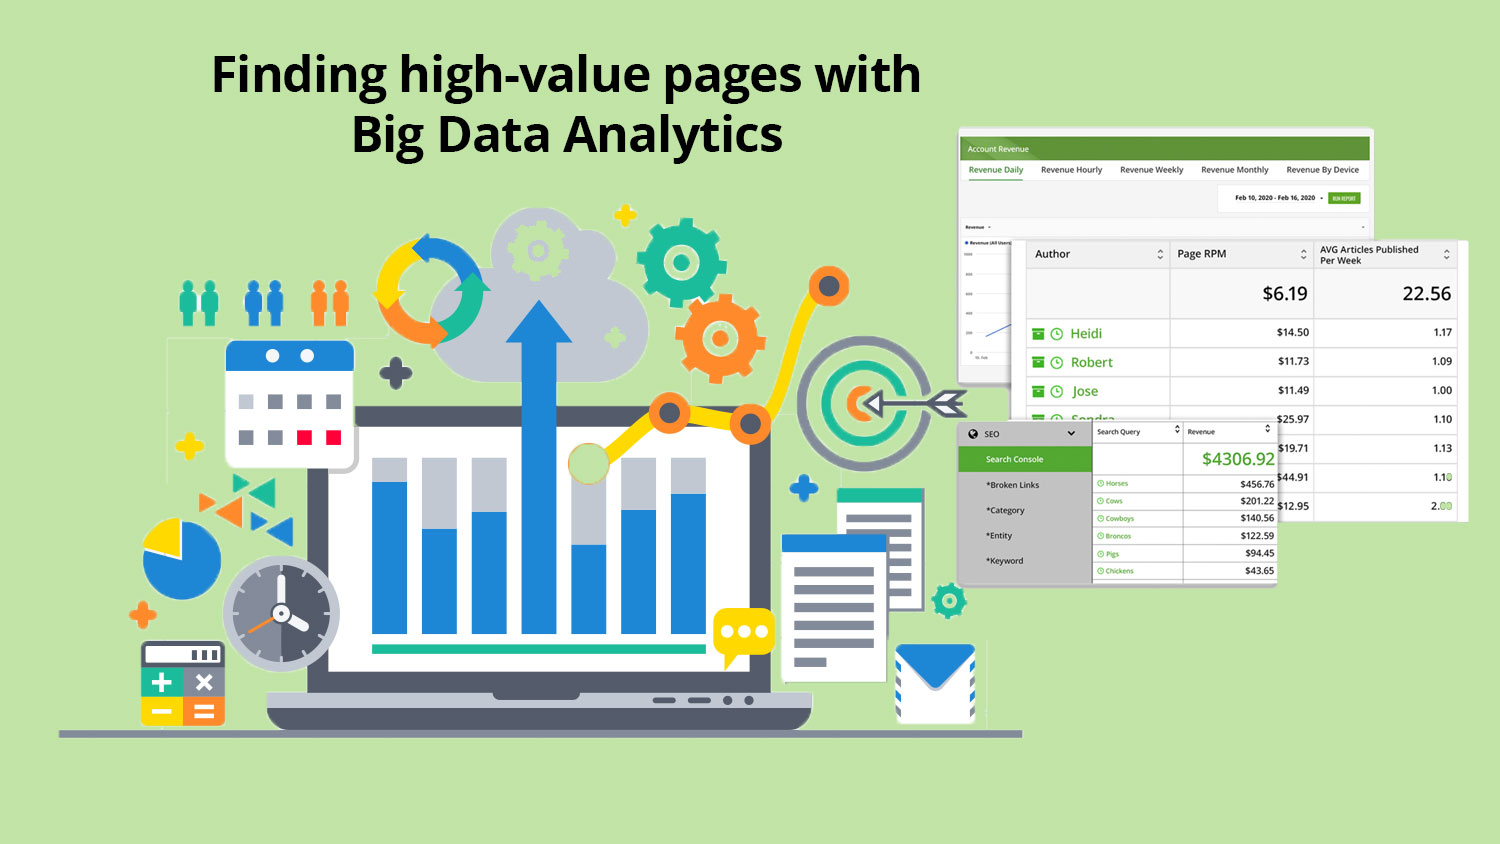 How to find high-value pages and increase revenue using Big Data Analytics